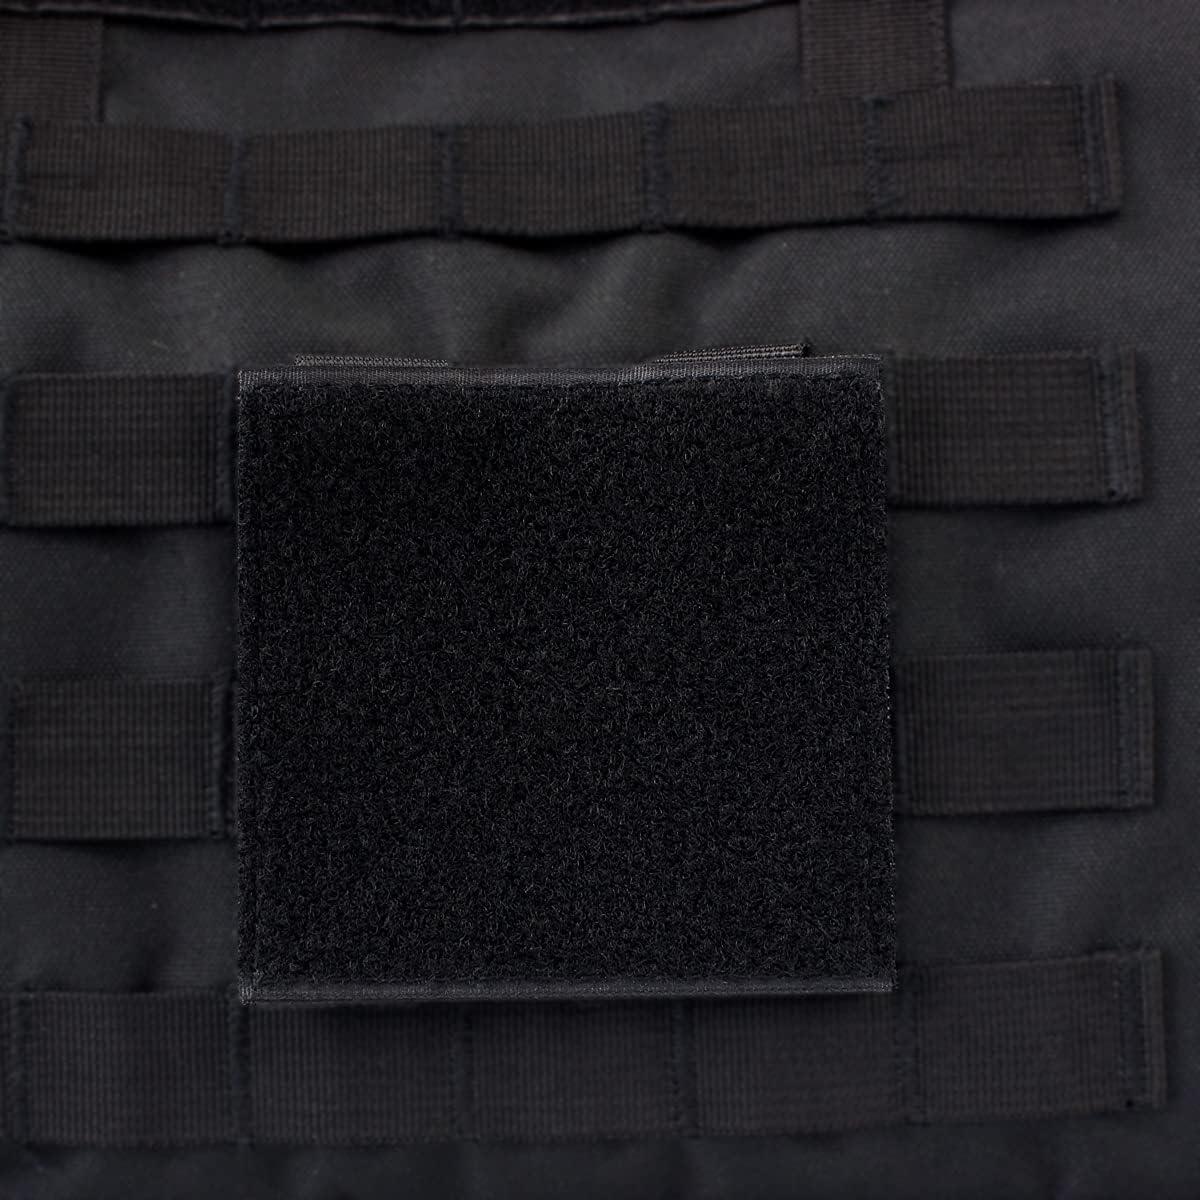 Tactical Scorpion Gear MOLLE Hook and Loop Mounting Placard Platform panel